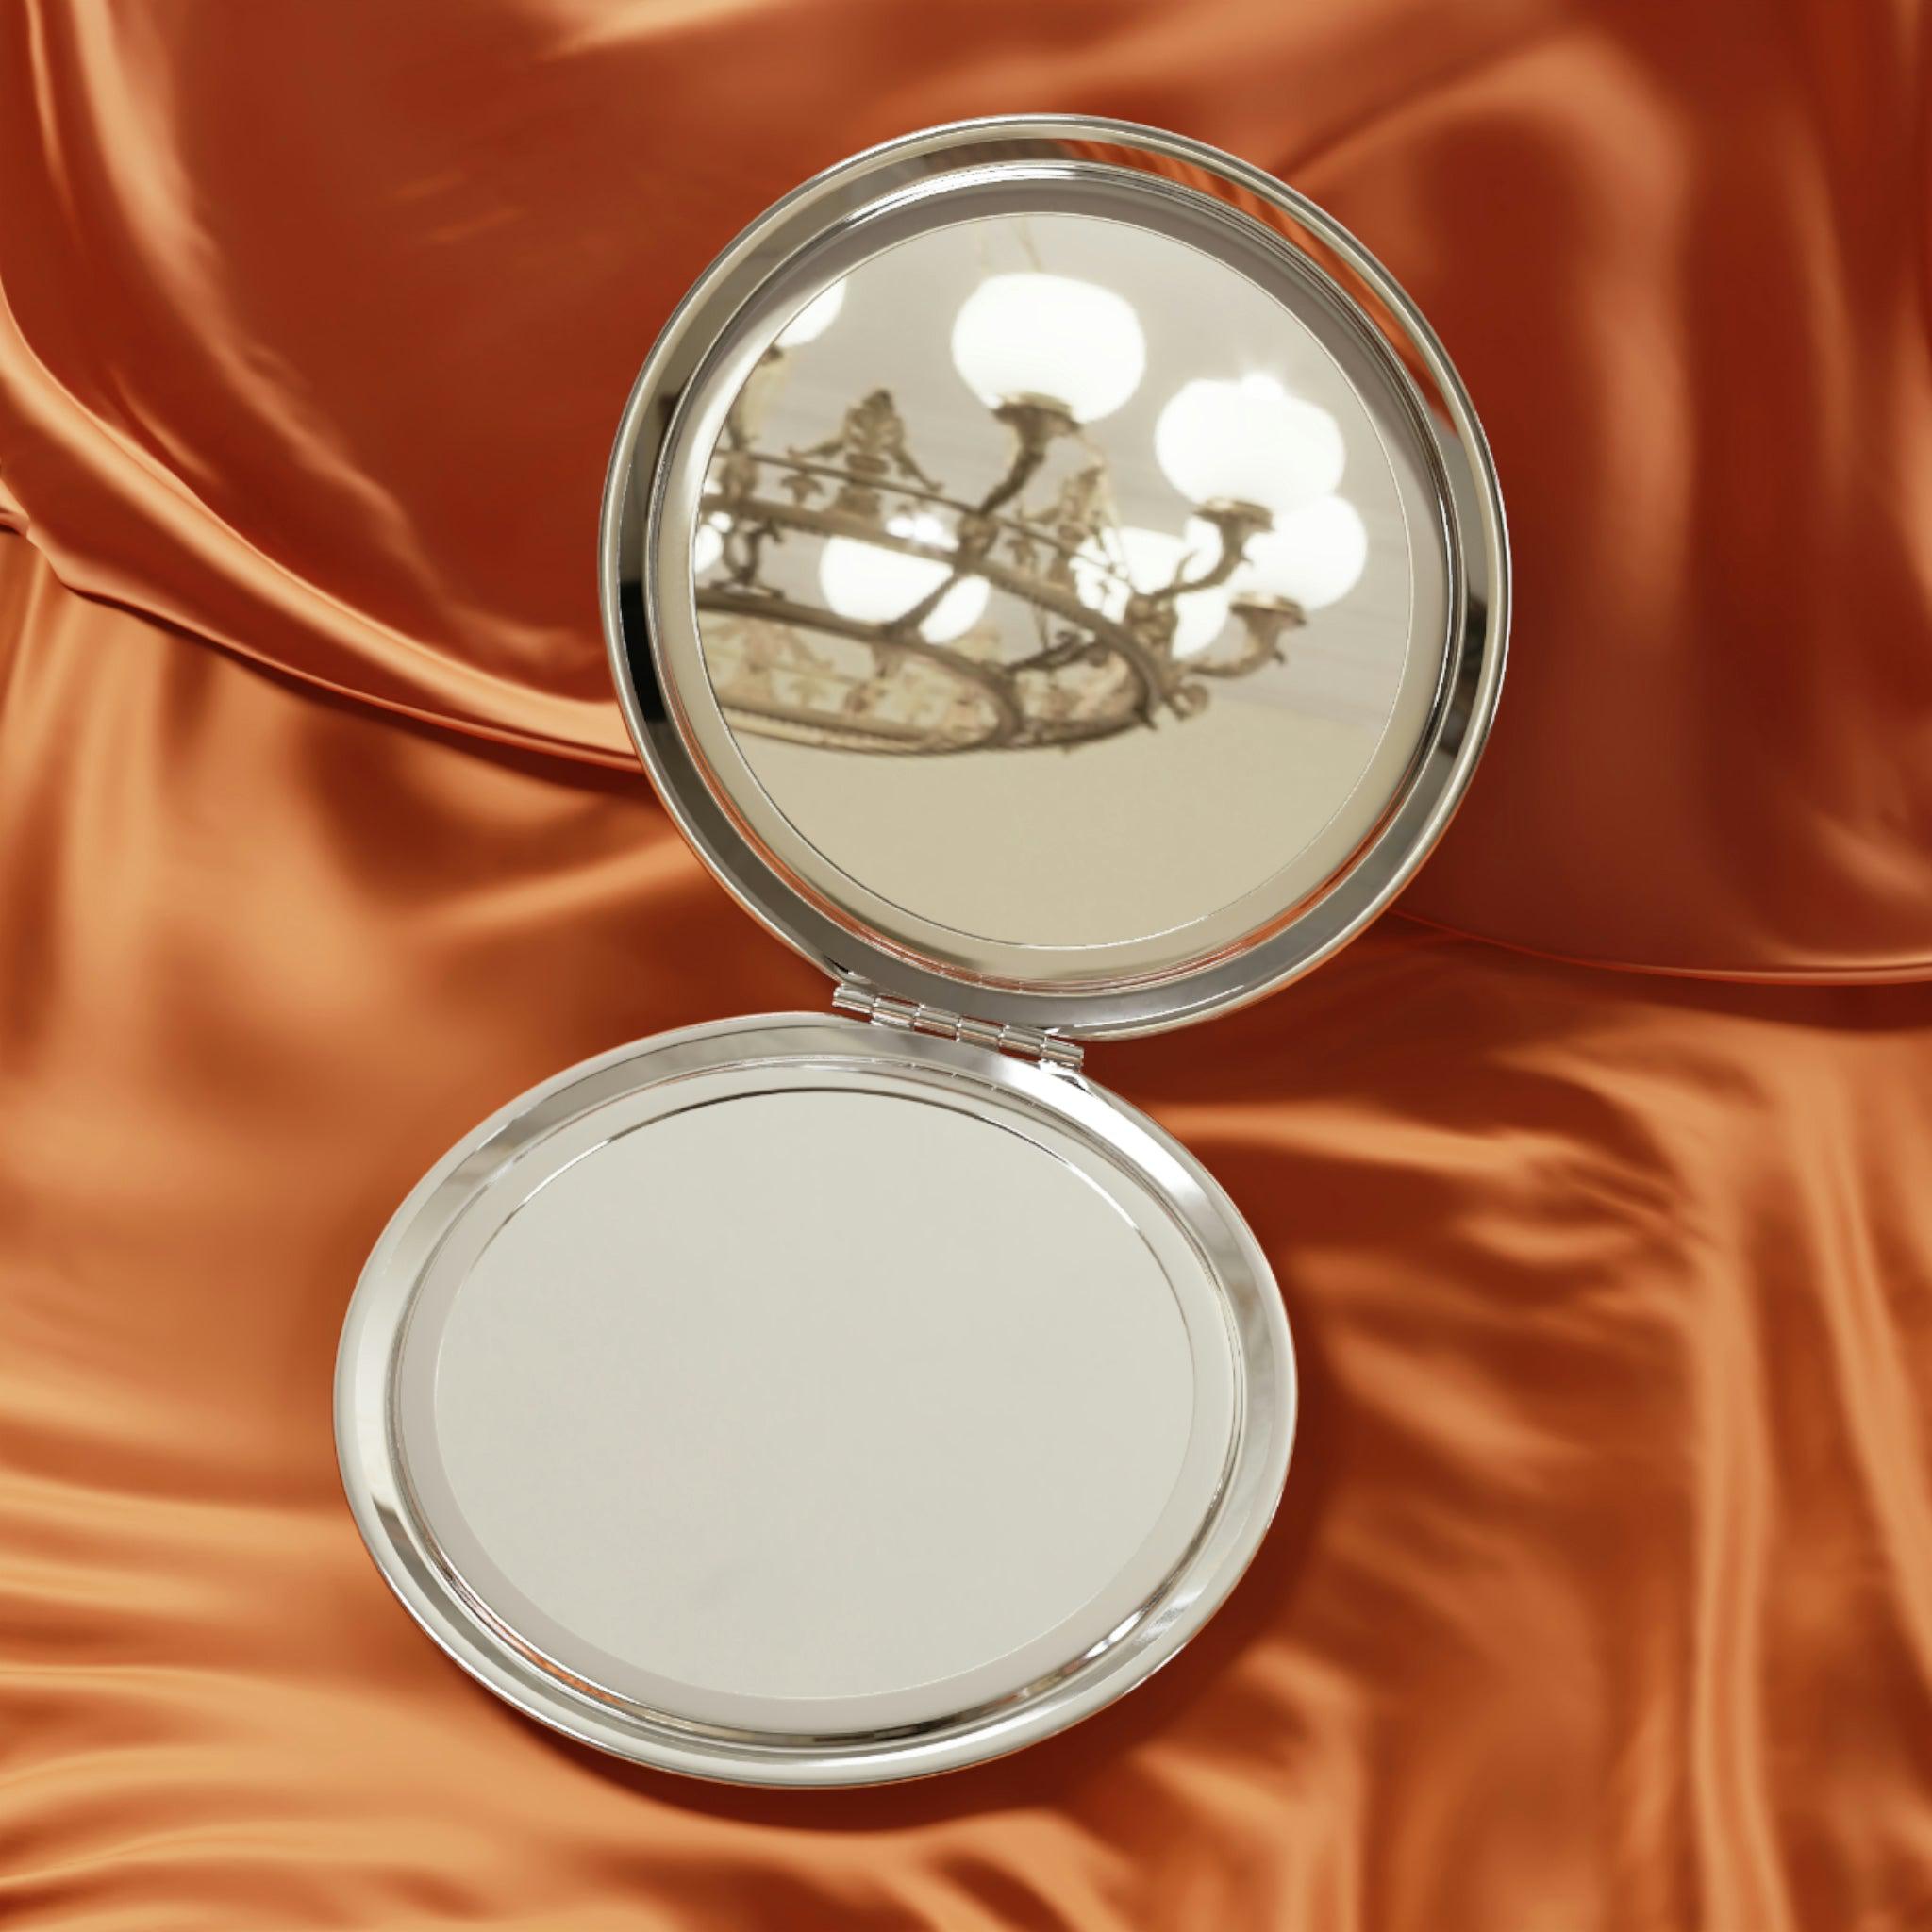 Hecate Compact Spell Mirror